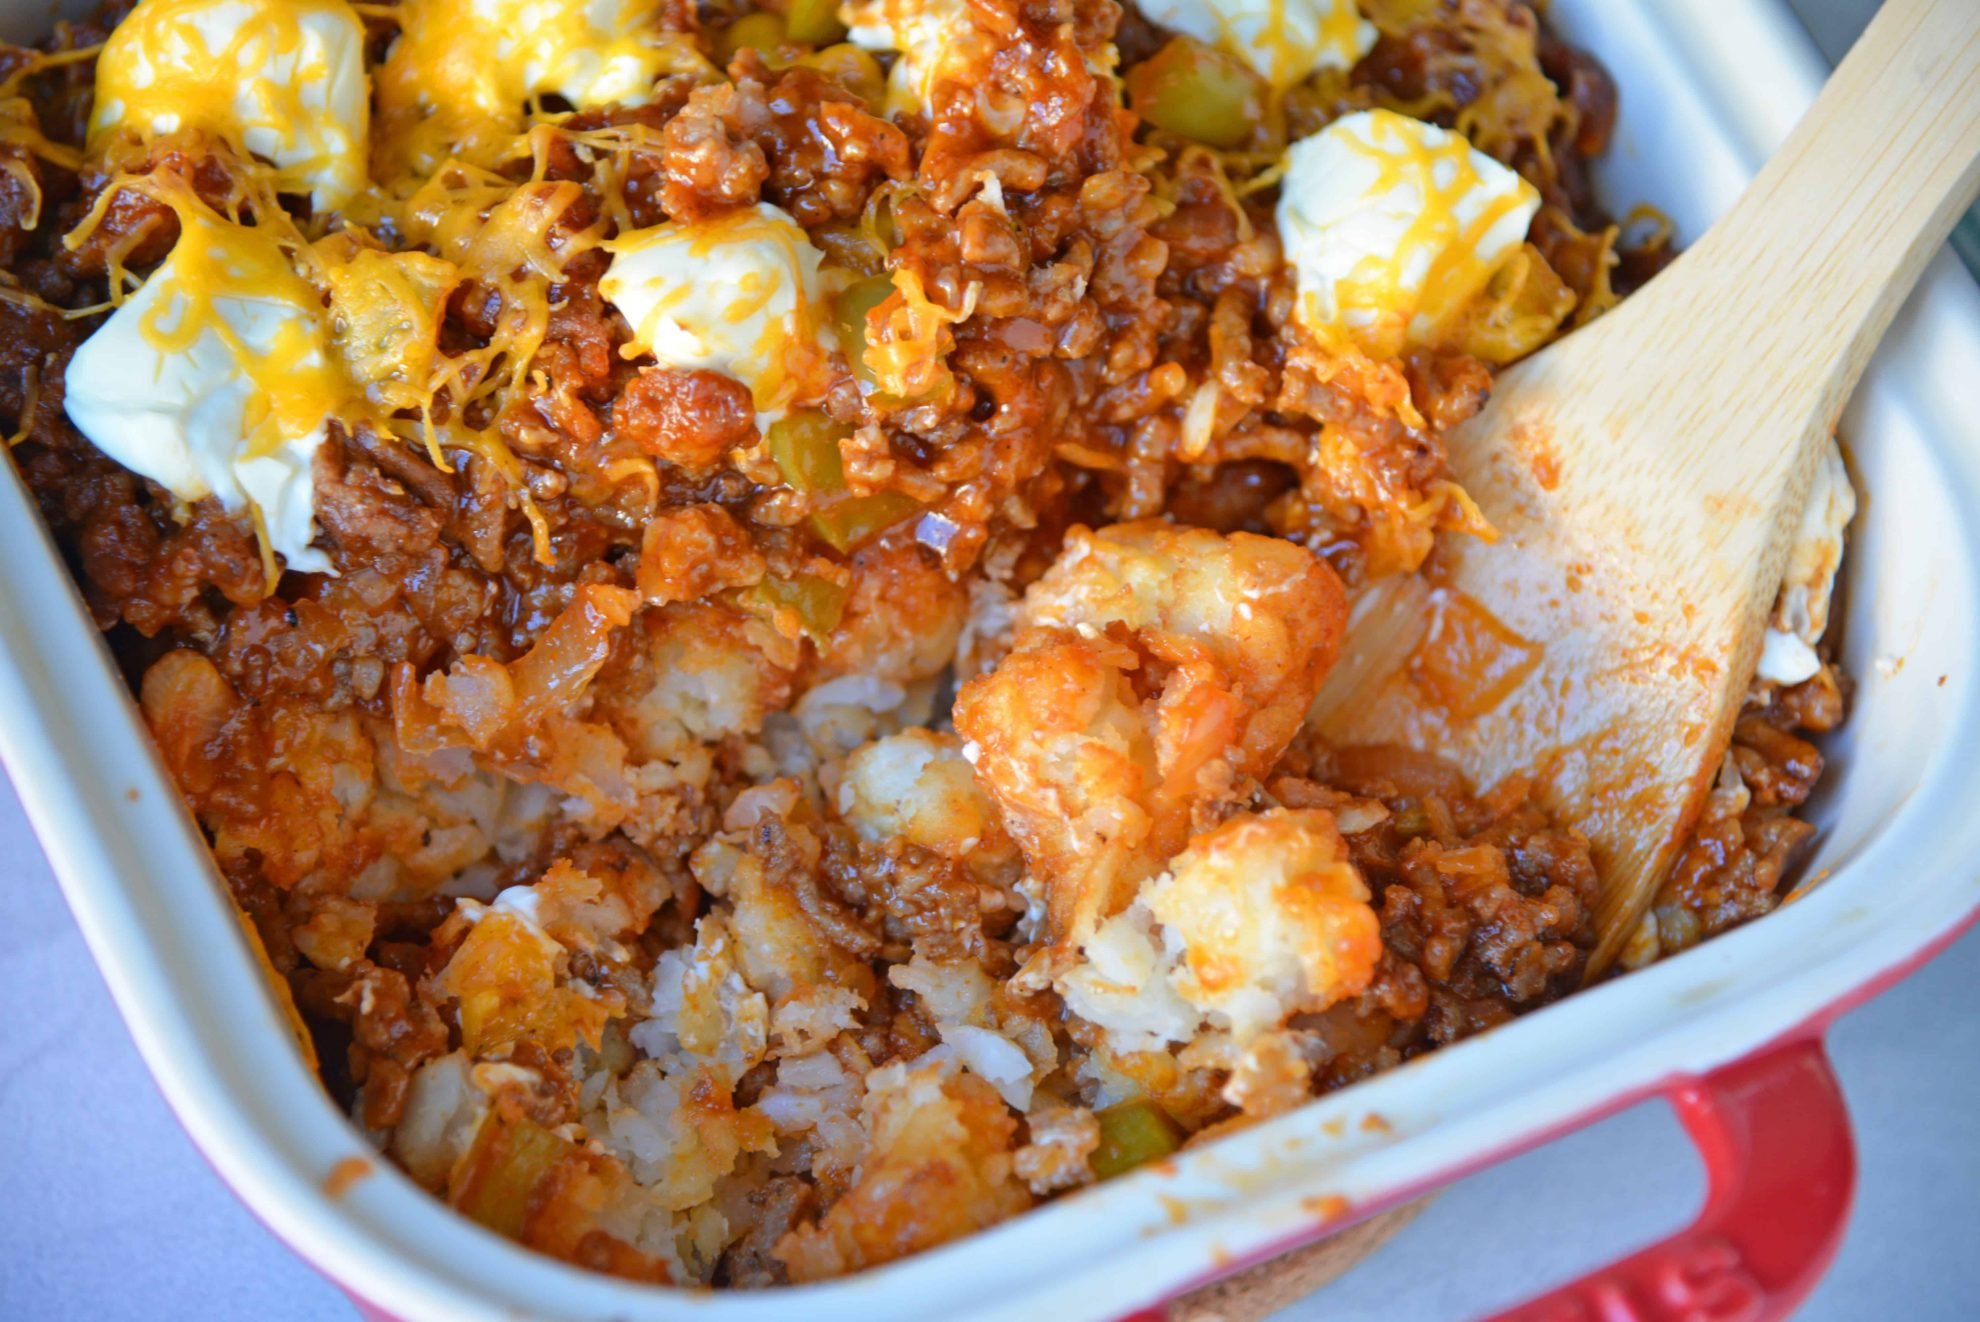 Sloppy Joe Tater Tot Casserole combines layers of crispy tater tots with homemade sloppy Joe mix, cream cheese and cheddar for the ultimate quick meal or party food! #tatertotcasserole #sloppyjoes www.savoryexperiments.com 